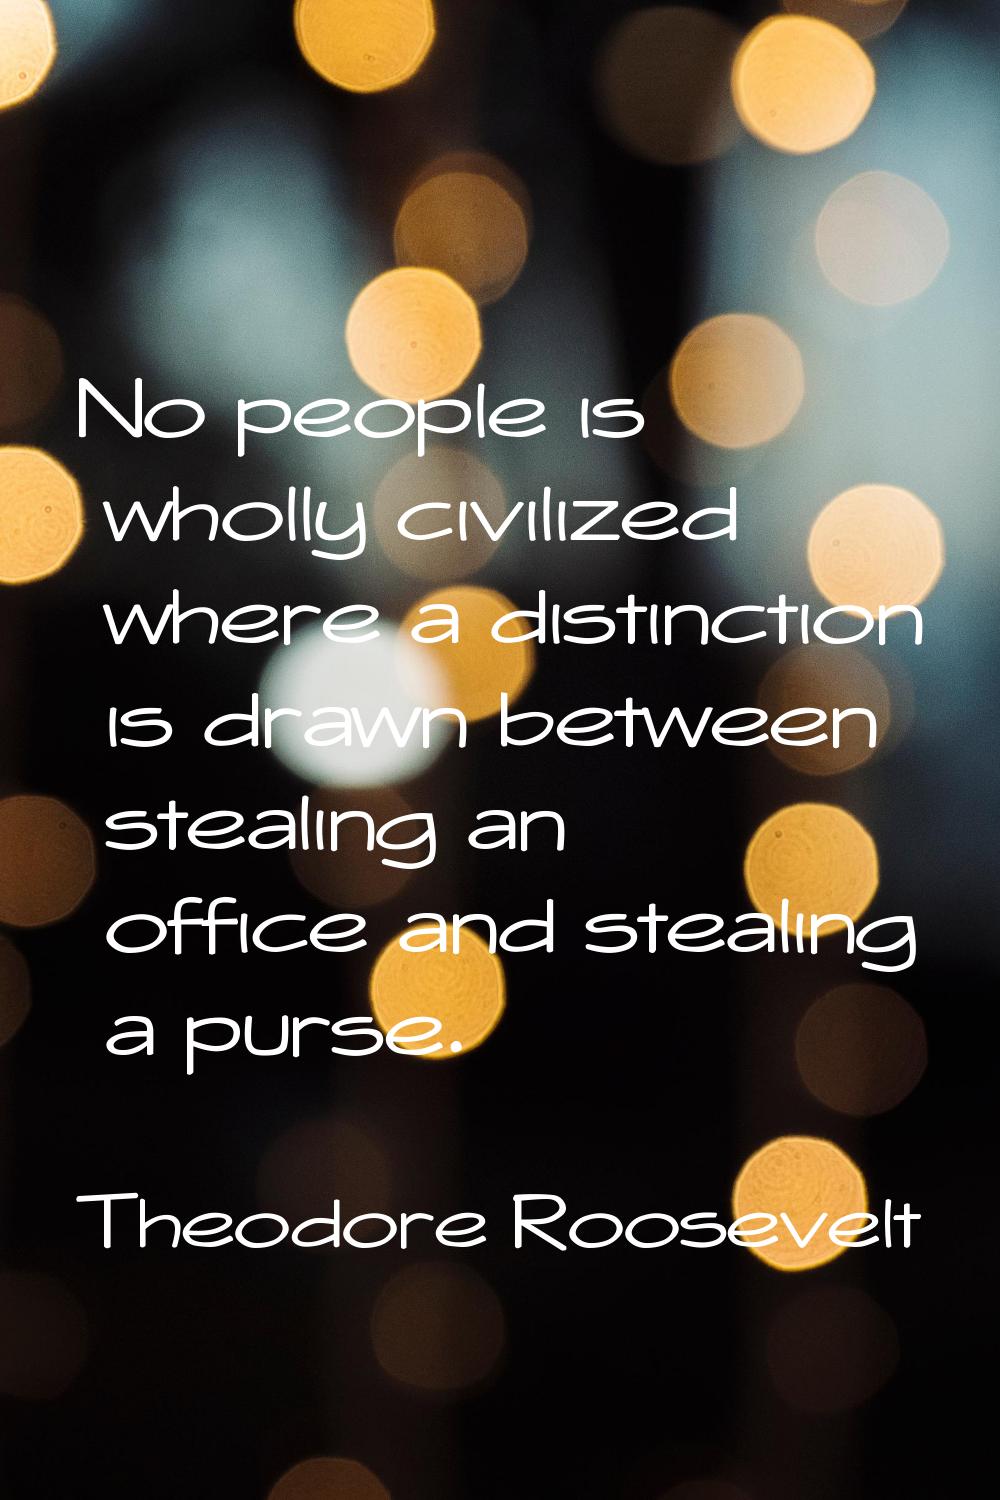 No people is wholly civilized where a distinction is drawn between stealing an office and stealing 